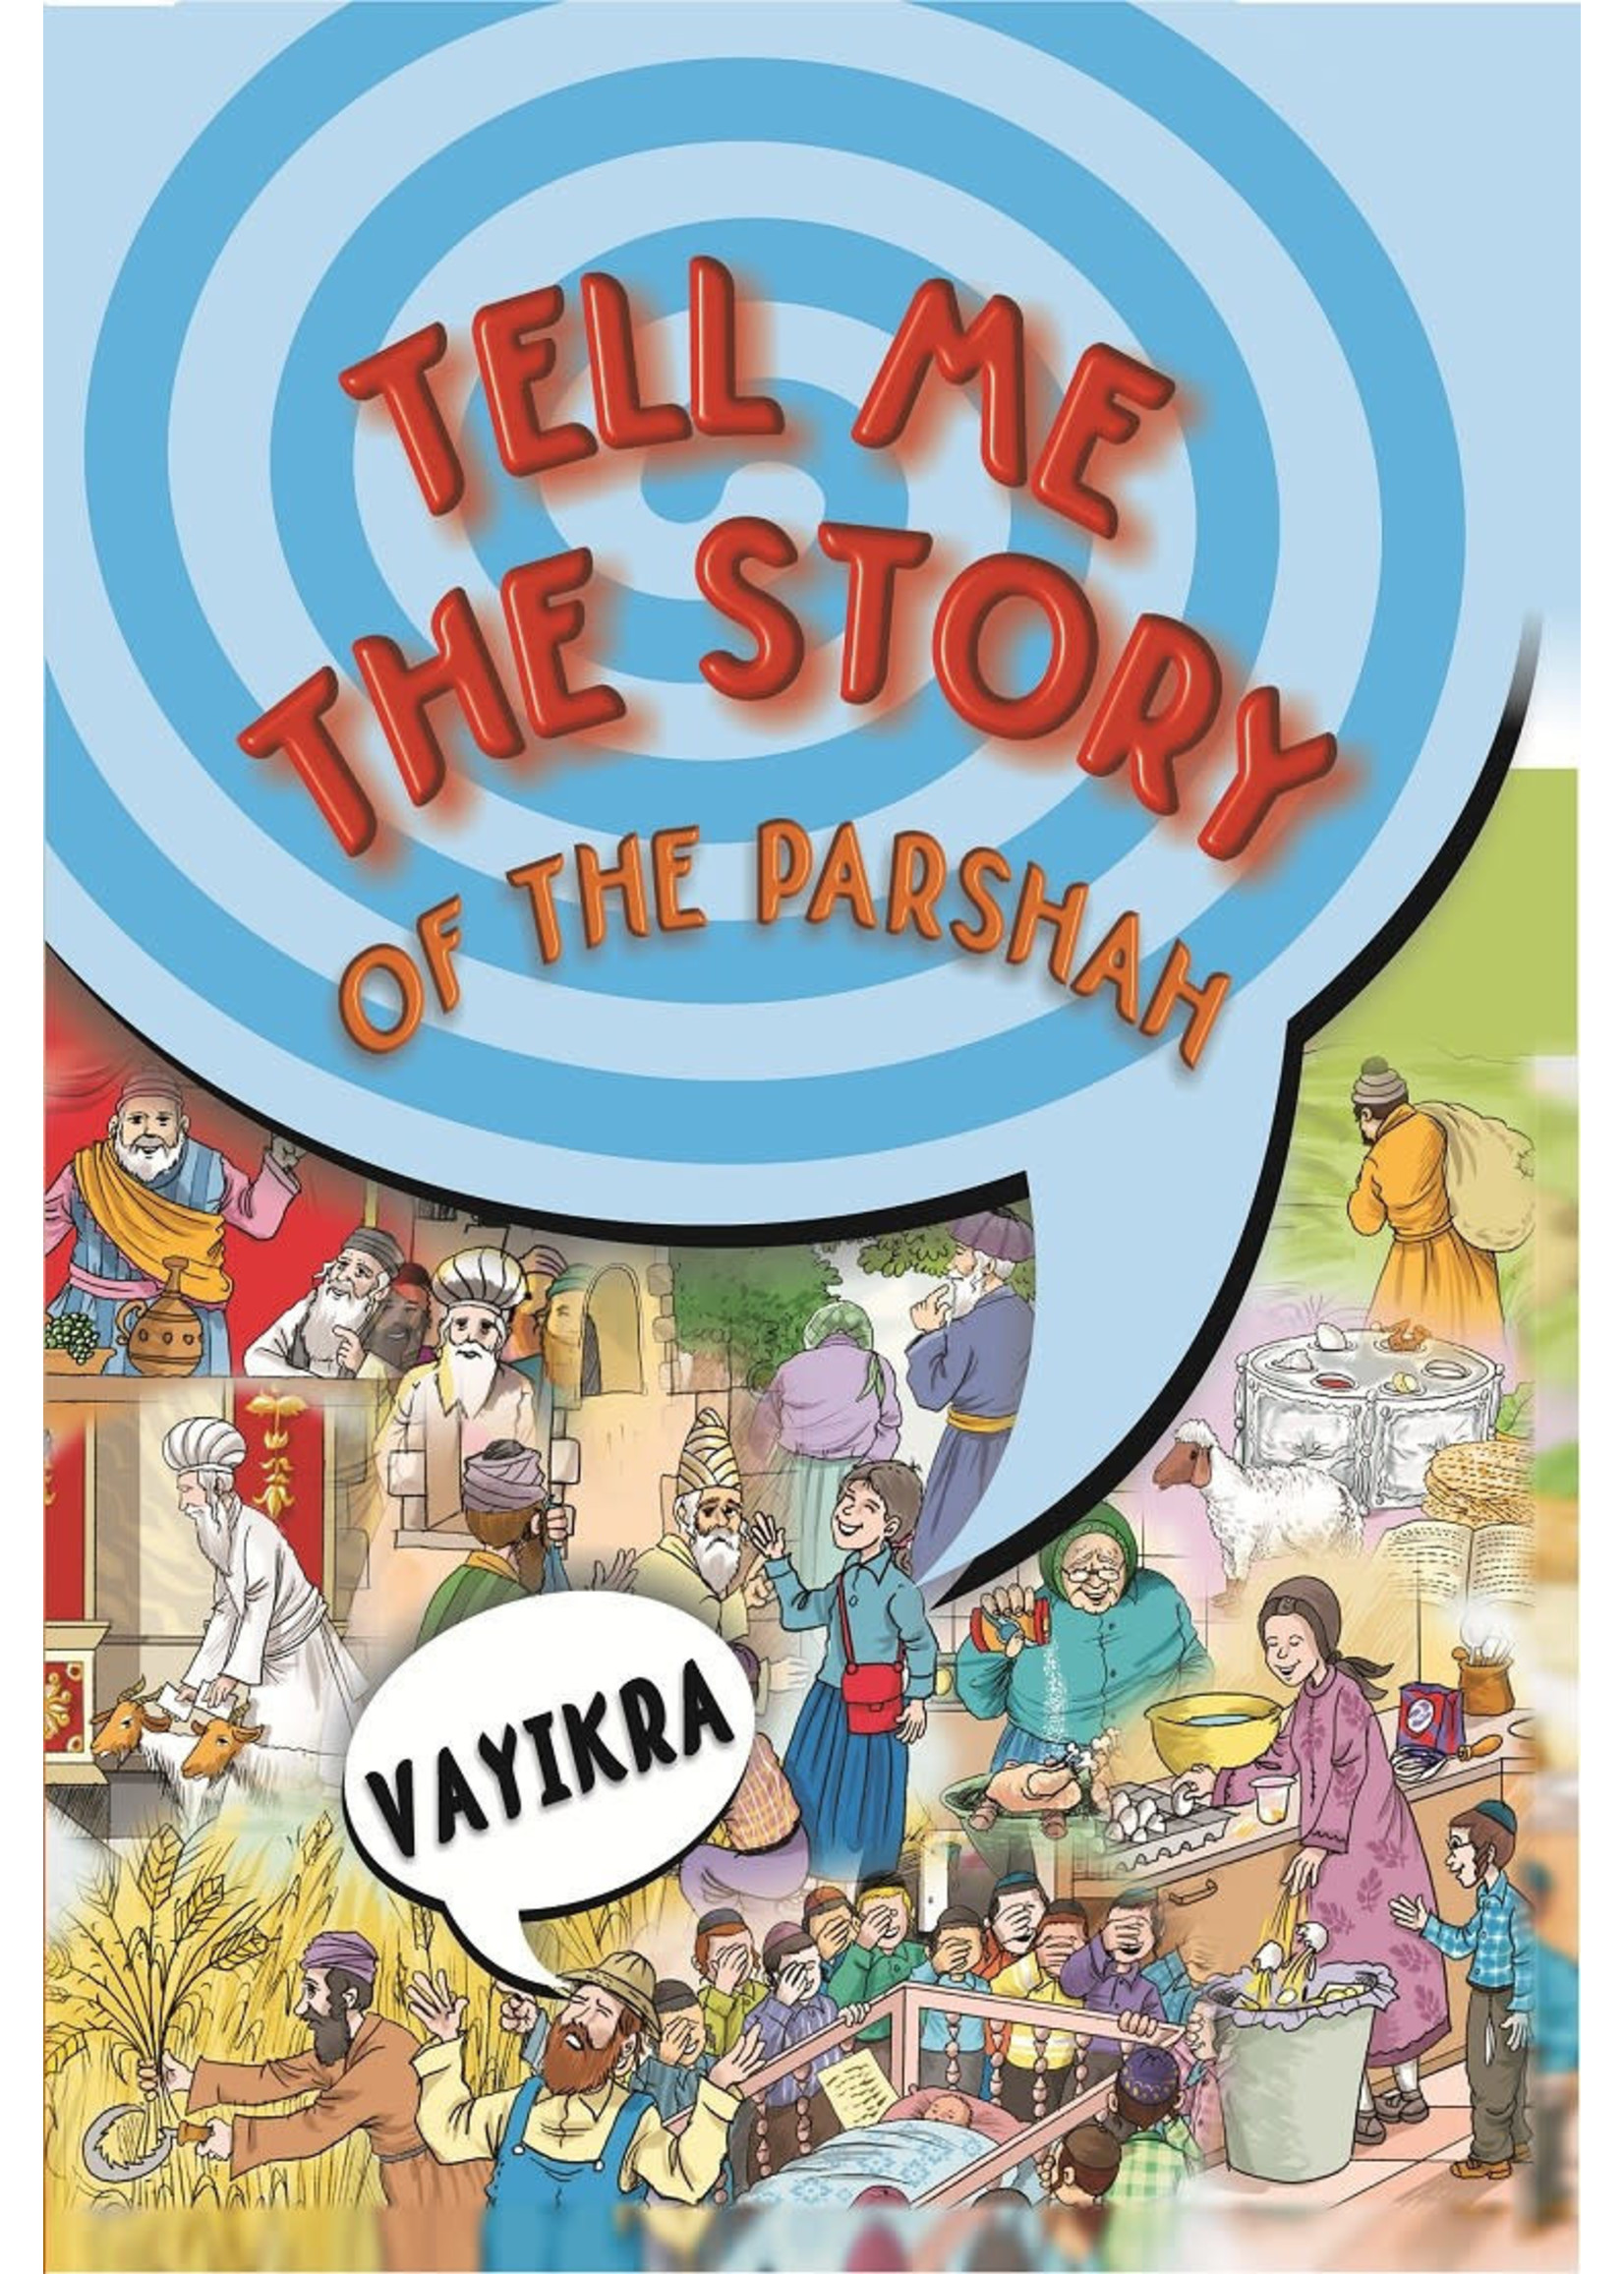 TELL ME THE STORY ... VAYIKRA